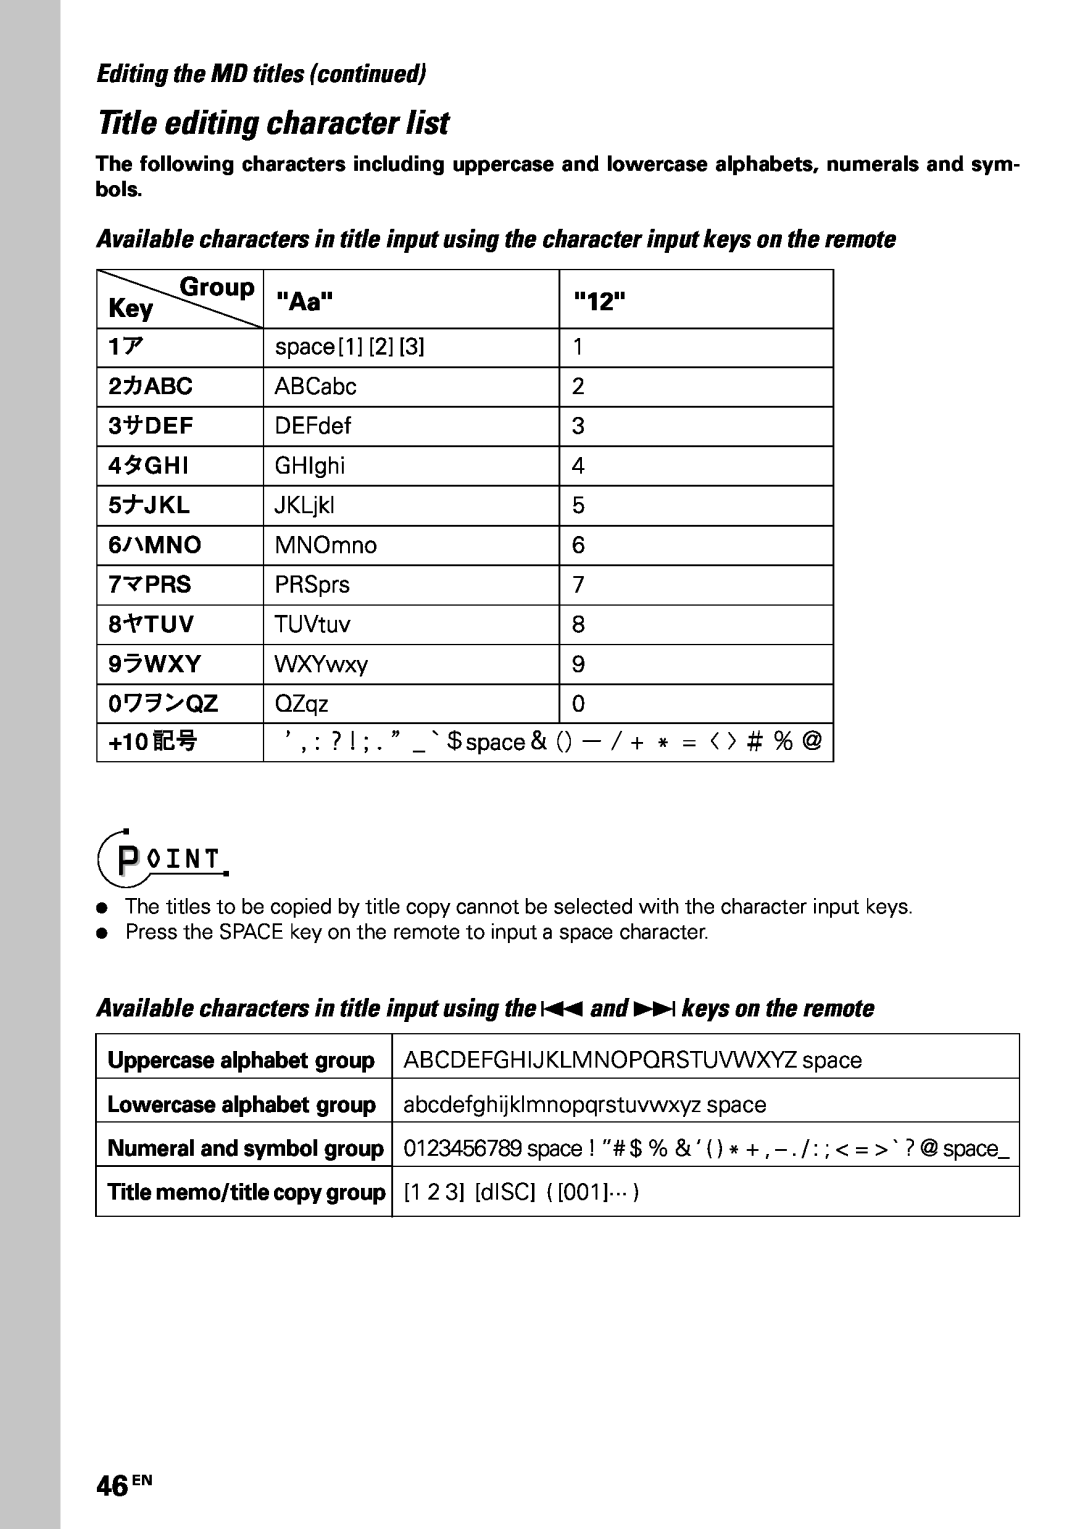 Kenwood MDX-G3 instruction manual Title editing character list, 46 EN, Editing the MD titles continued 